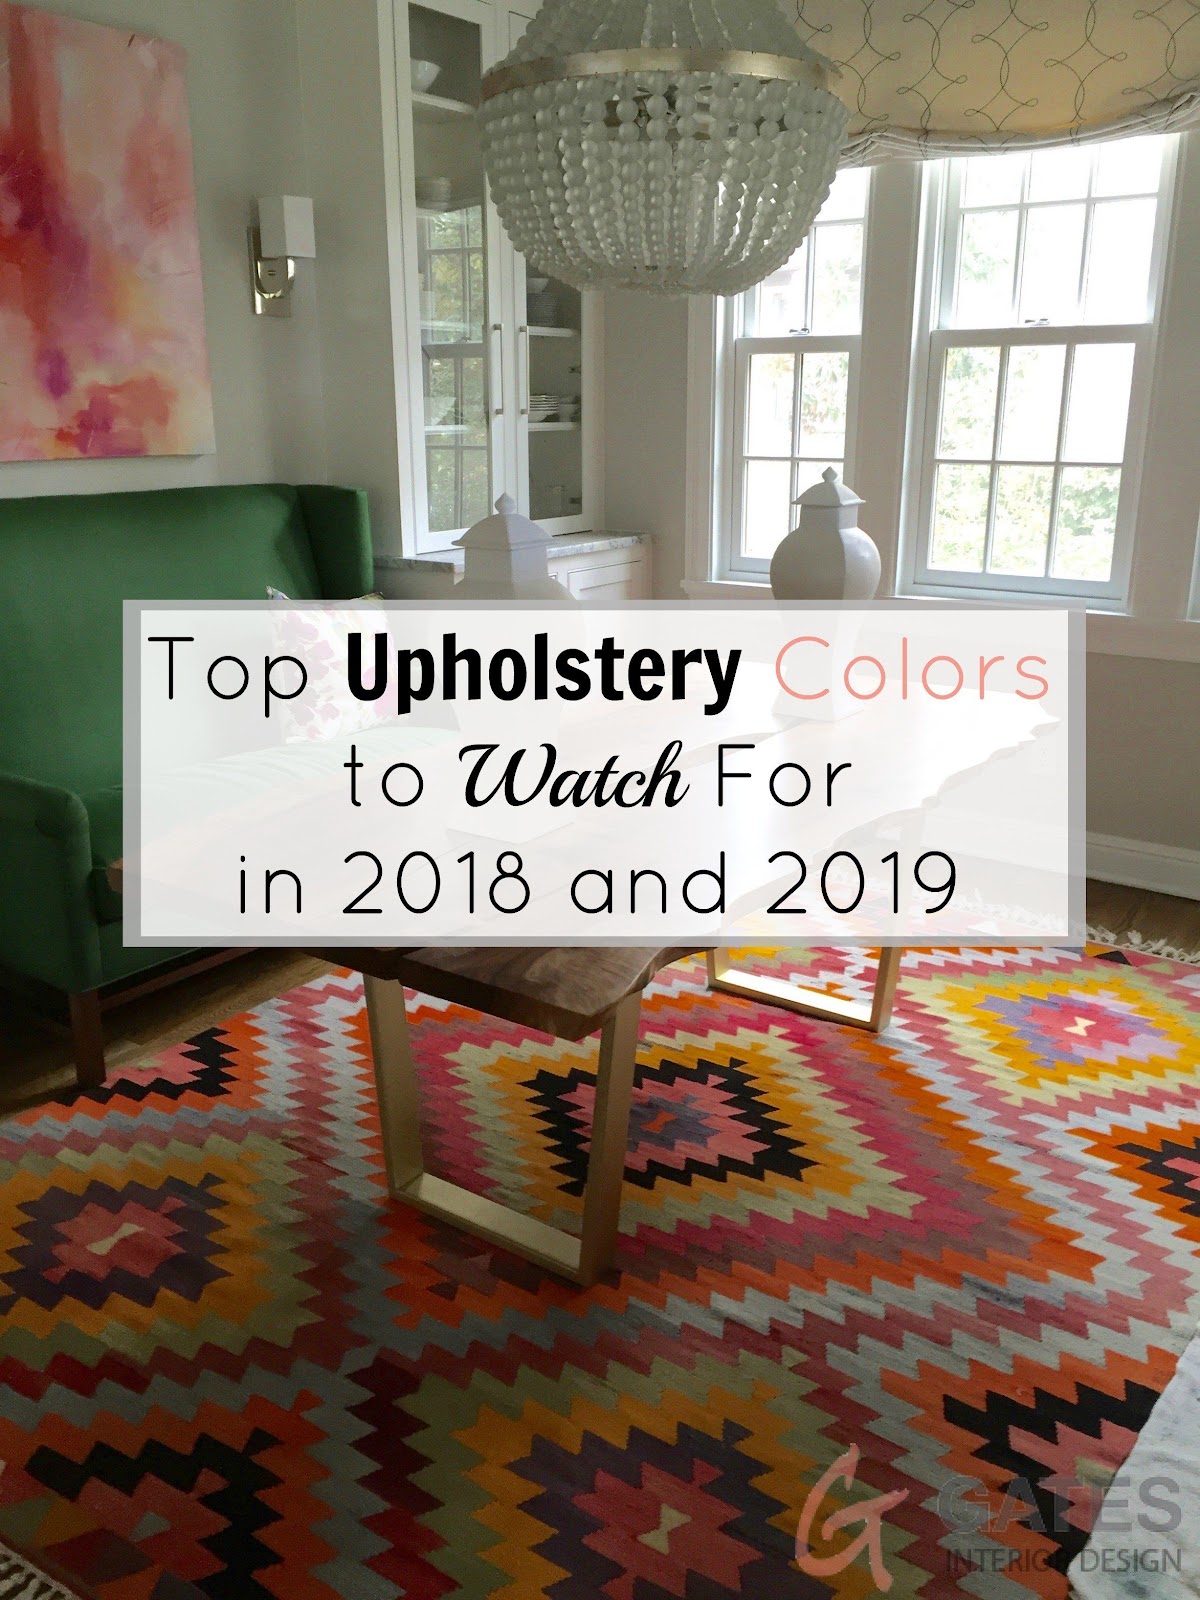 Popular Furniture Trends to Watch For